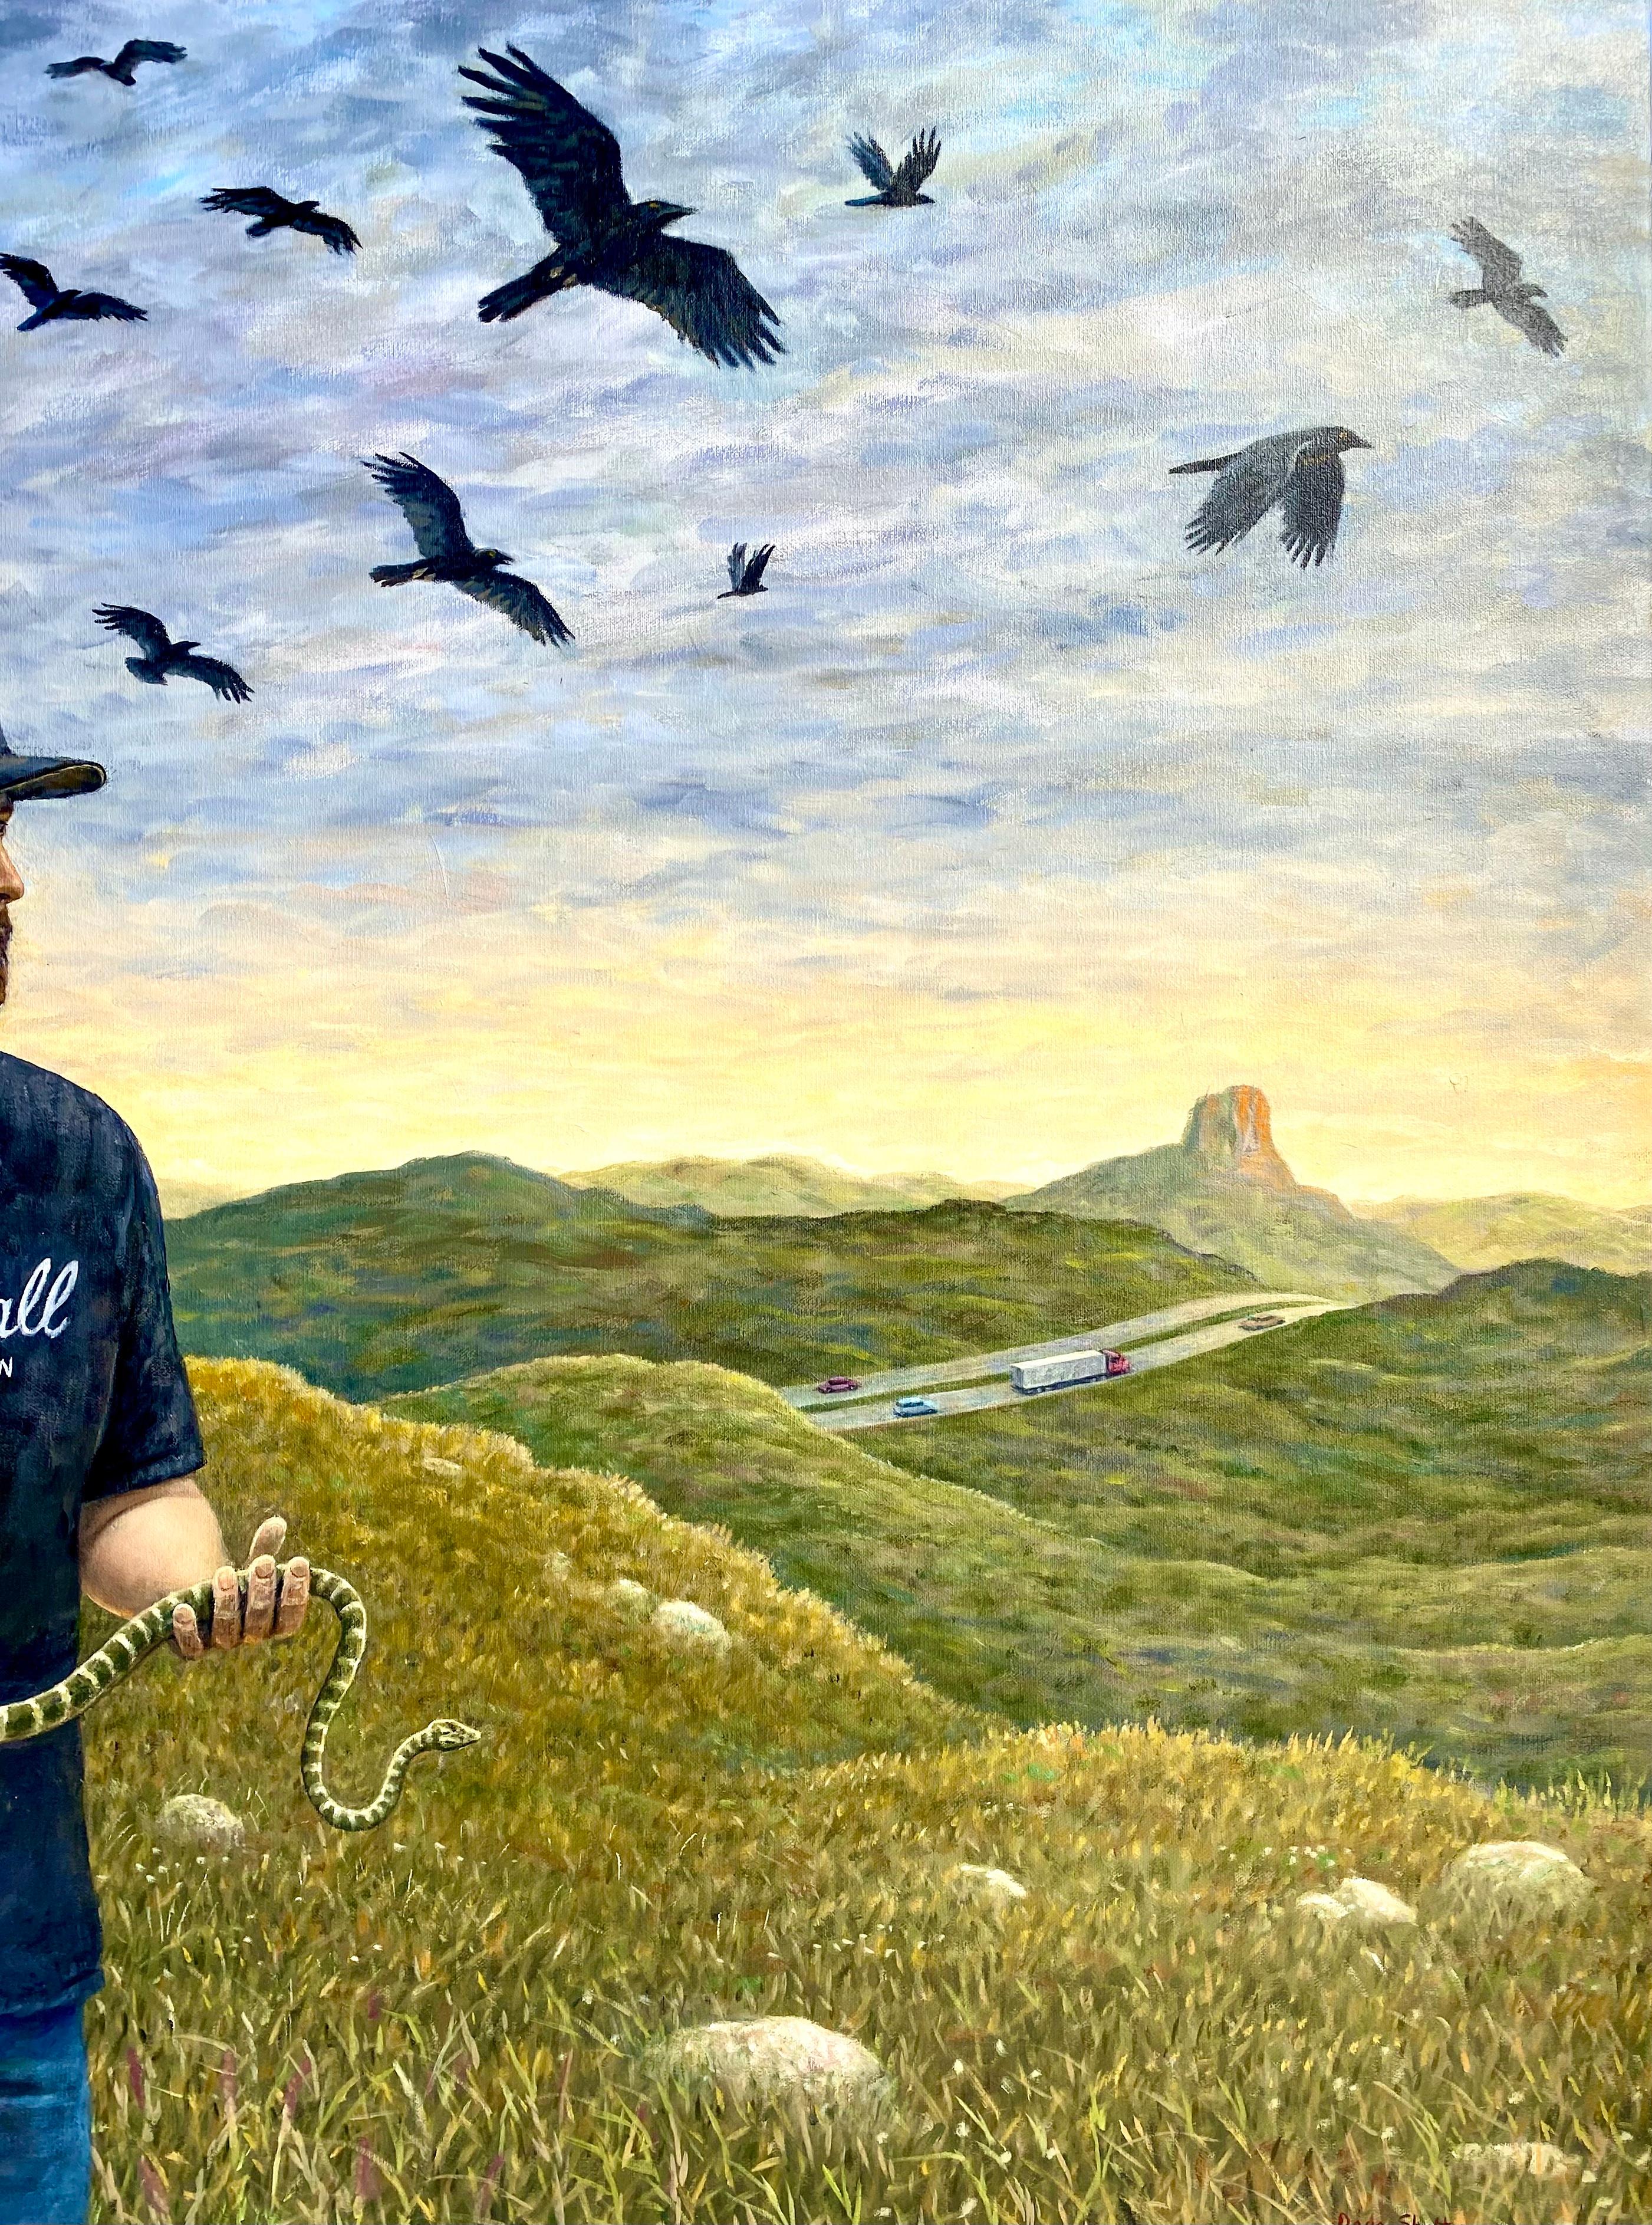 A man stands alone in a field wearing a black Marhsall Amplification shirt and a black hat. He's holding a snake with both hands while a flock of birds flys overhead. The Blue Bird Motel stands in the background, while a nearby highway can be seen